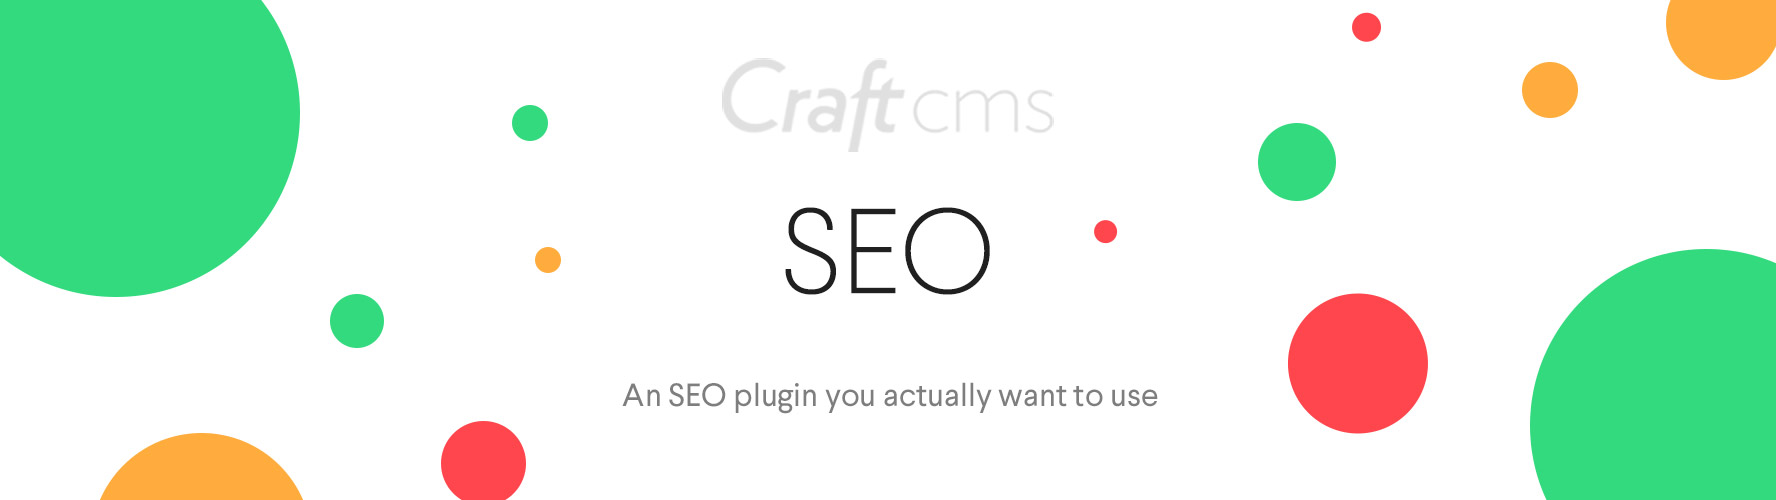 SEO for Craft CMS